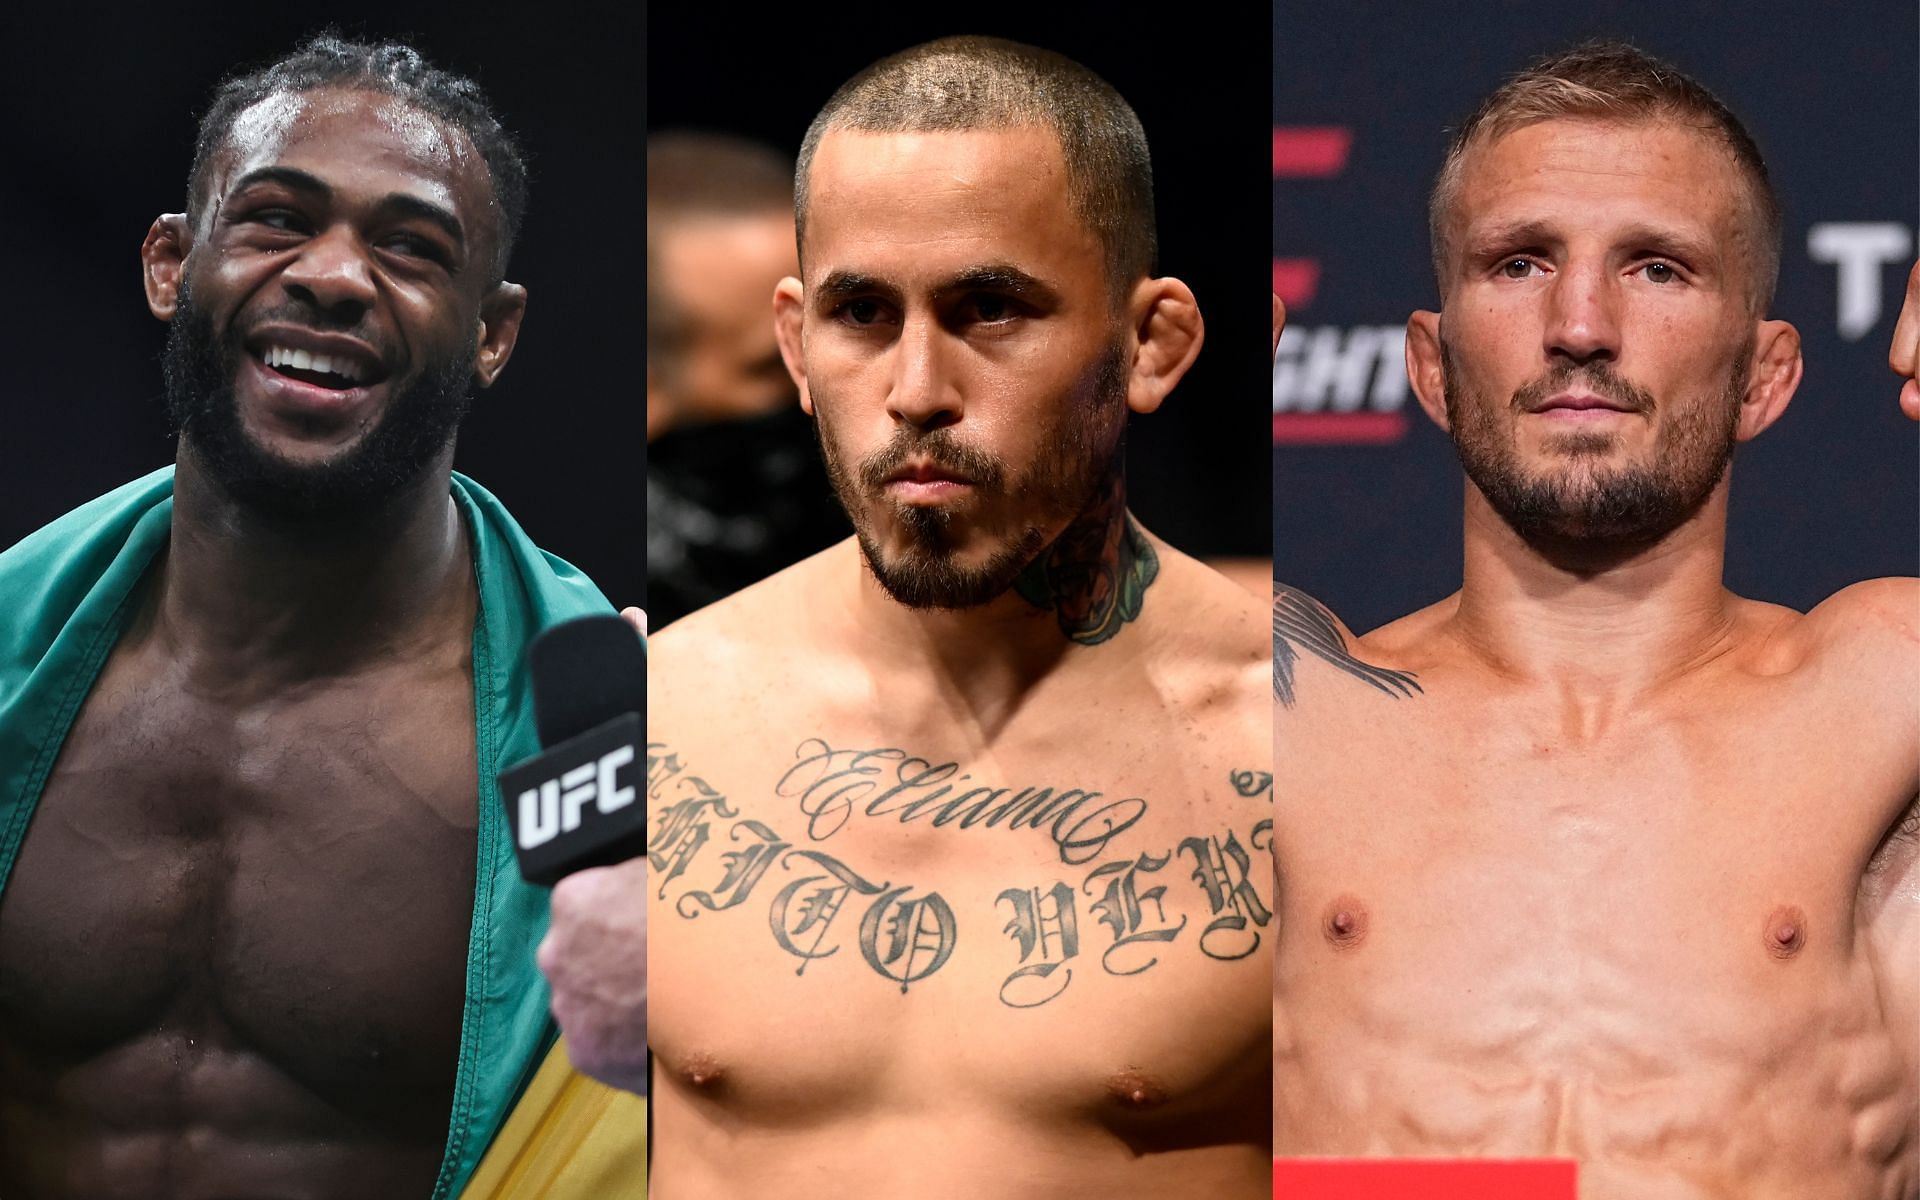 Aljamain Sterling (left), Marlon Vera (center), and T.J. Dillashaw (right). [Images courtesy: all images from Getty Images]